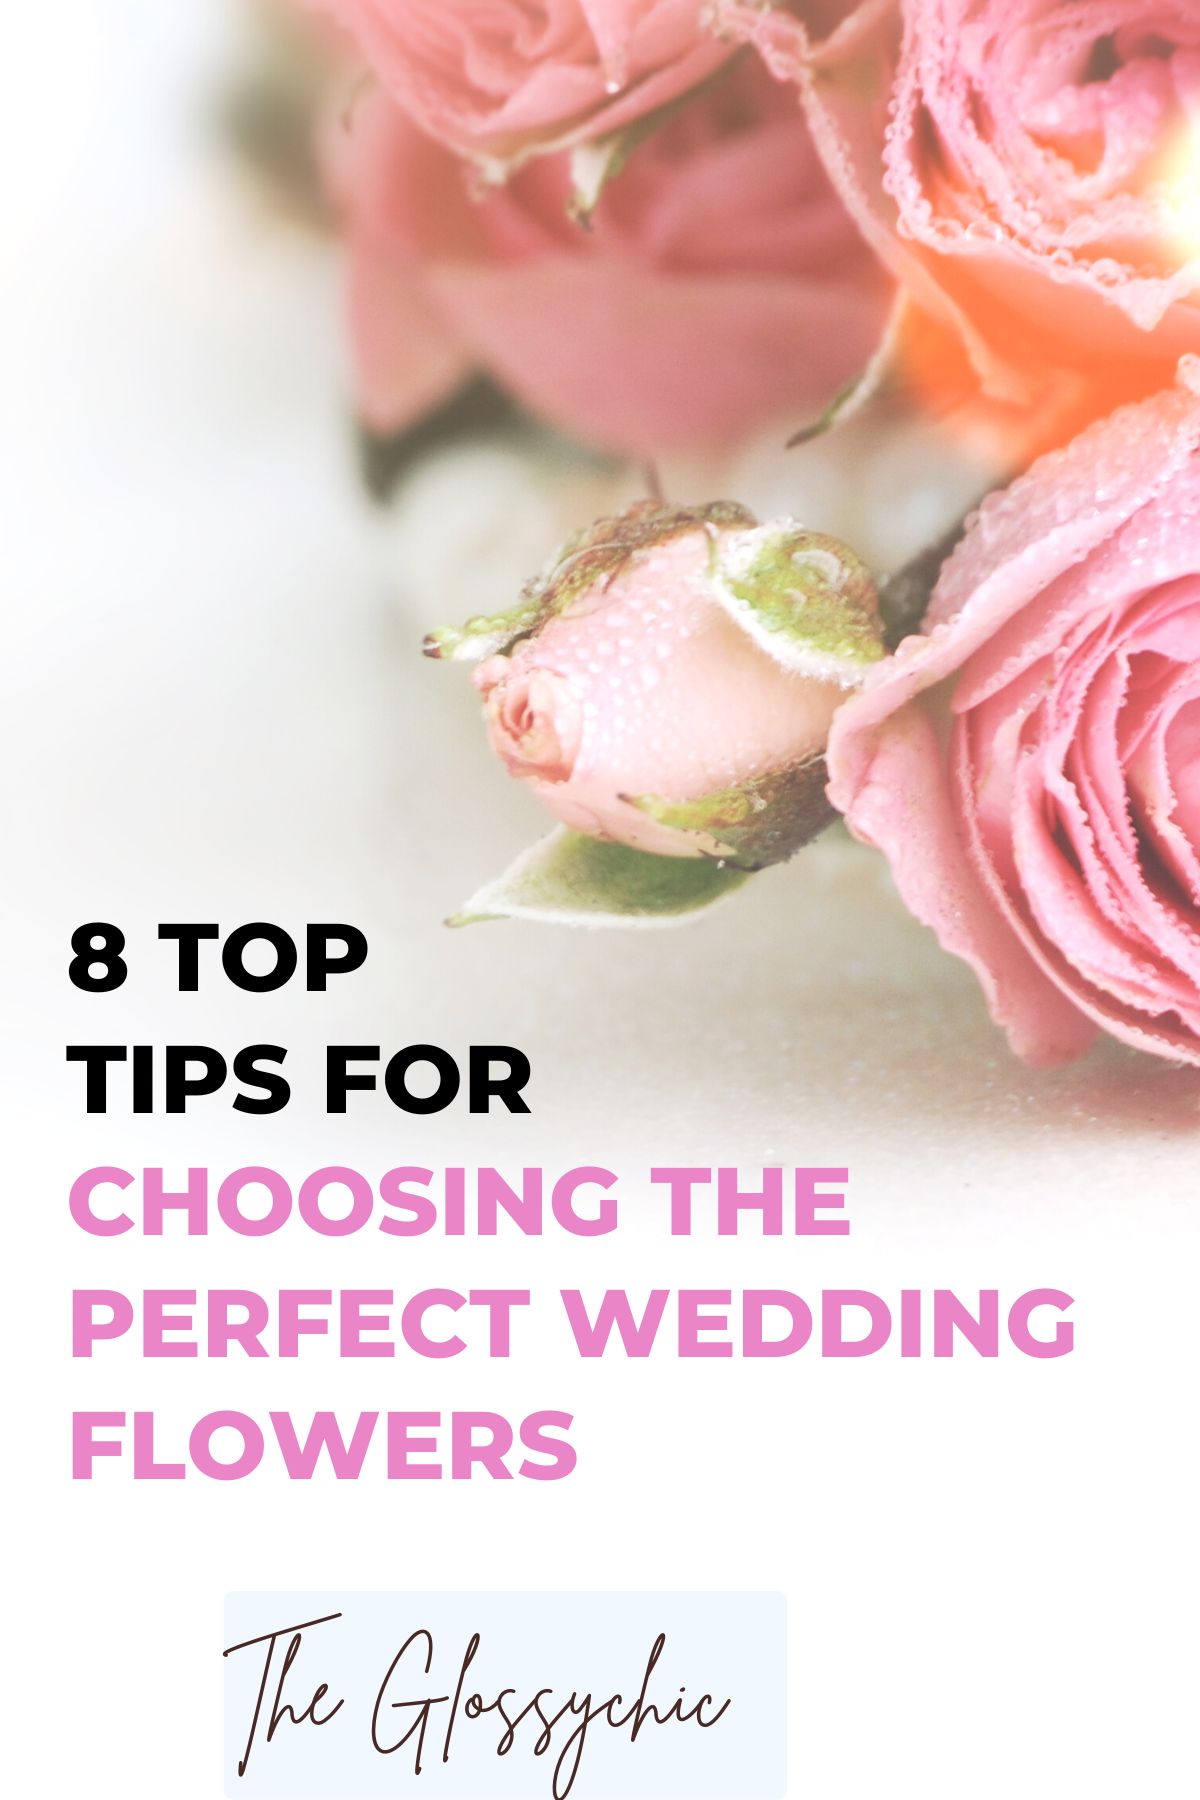 8 Top Tips For Choosing The Perfect Wedding Flowers